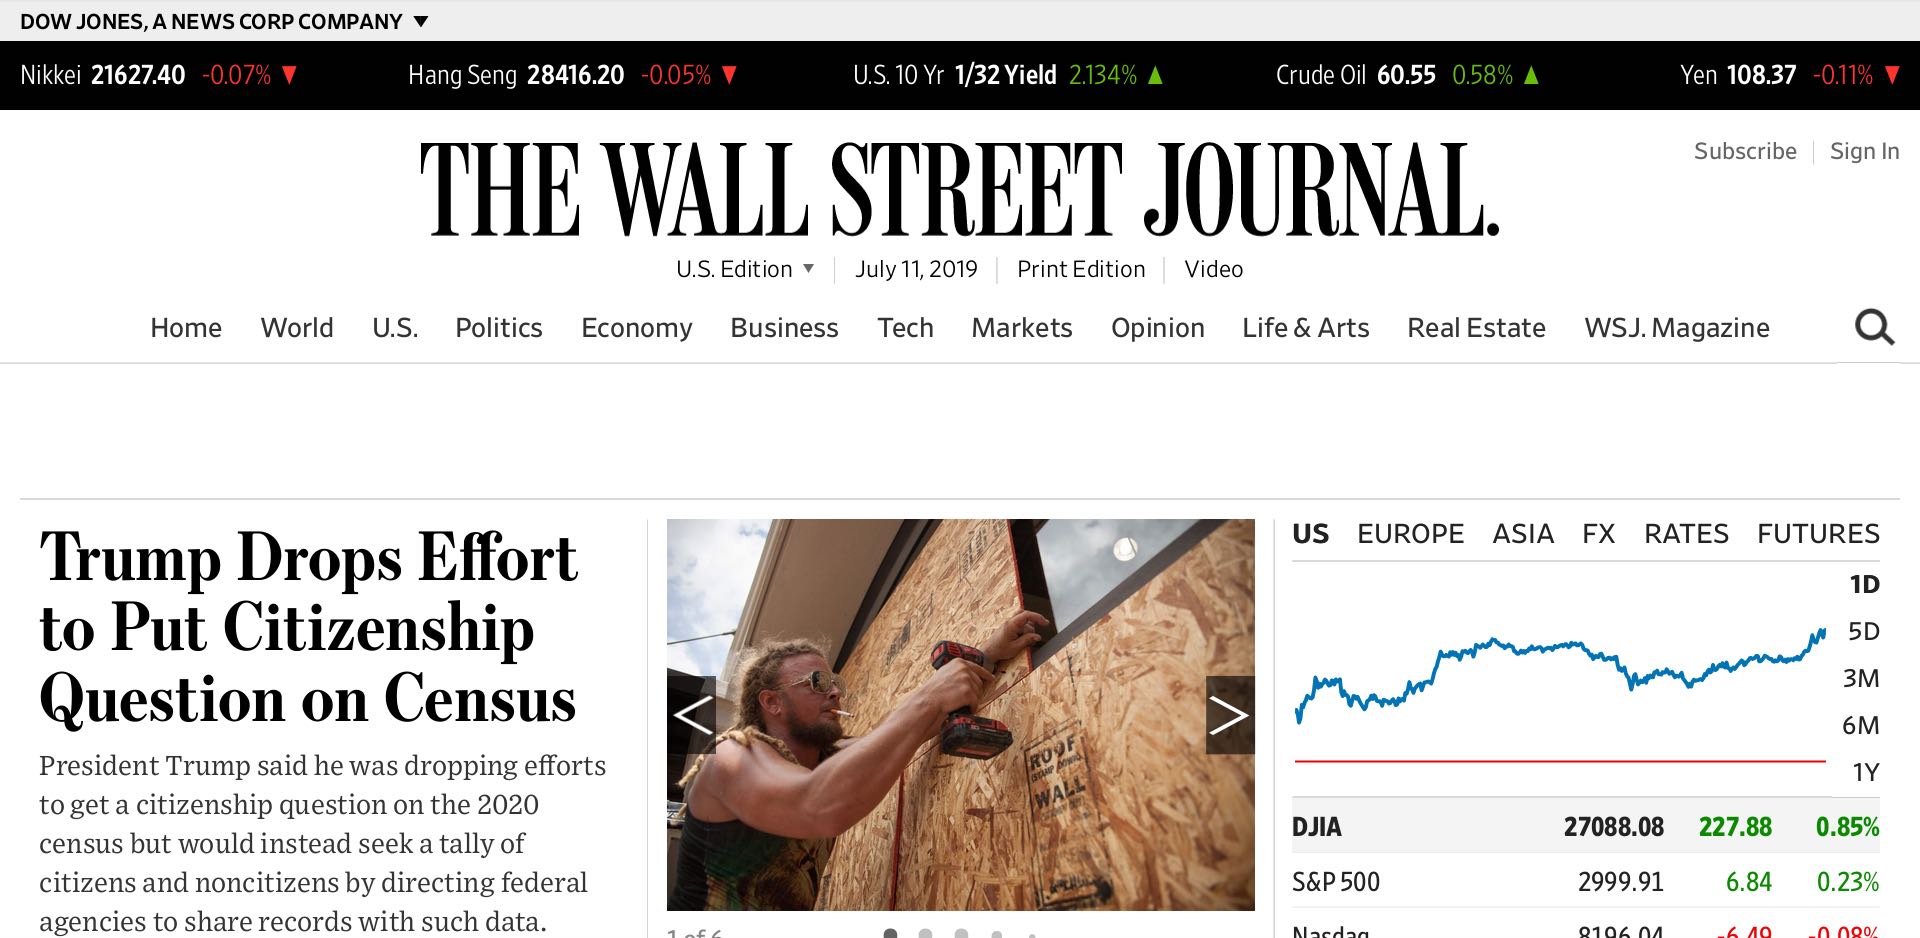 The Wall Street Journal home page on July 7, 2019 